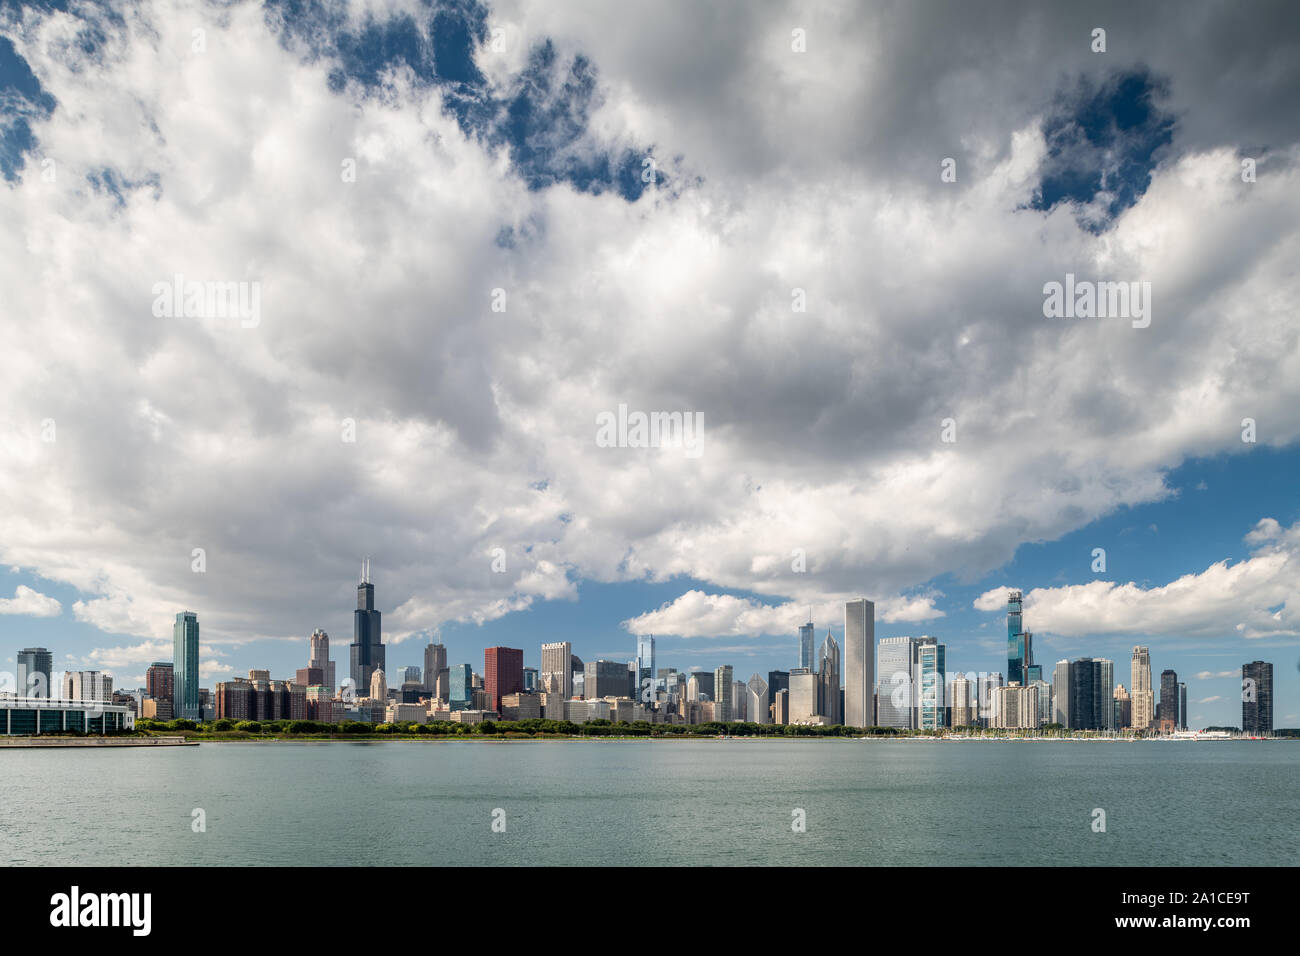 Chicago Skyline and Lake Michigan on a cloudy day Stock Photo